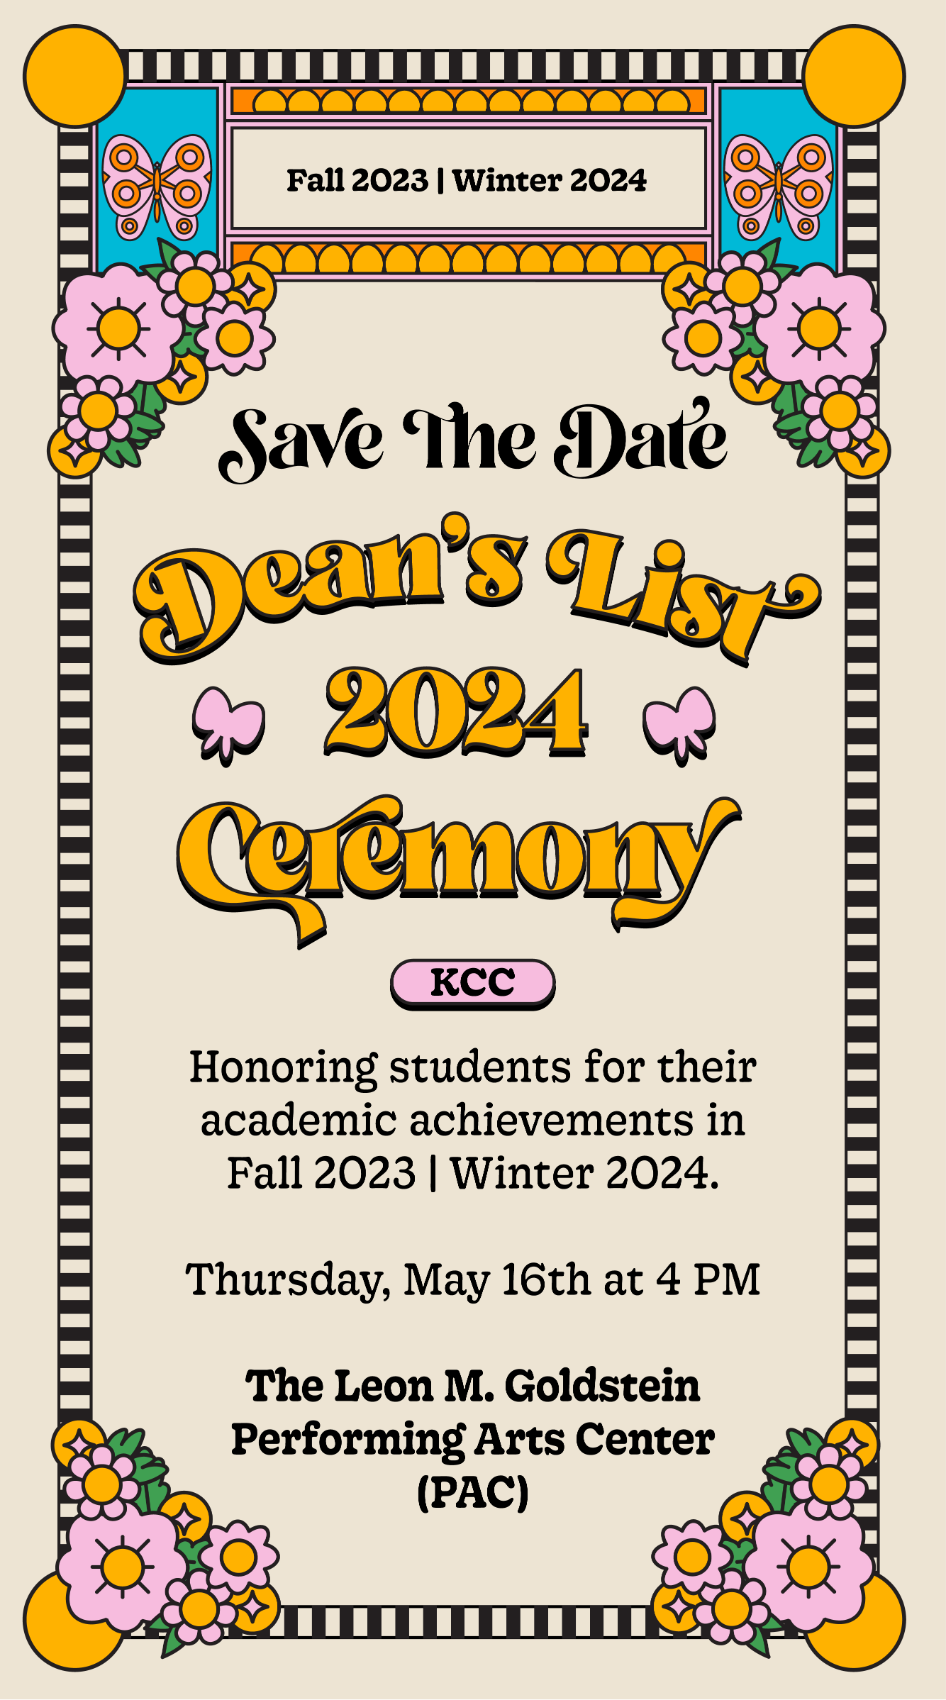 Save the Date Dean's List 2024 Ceremony